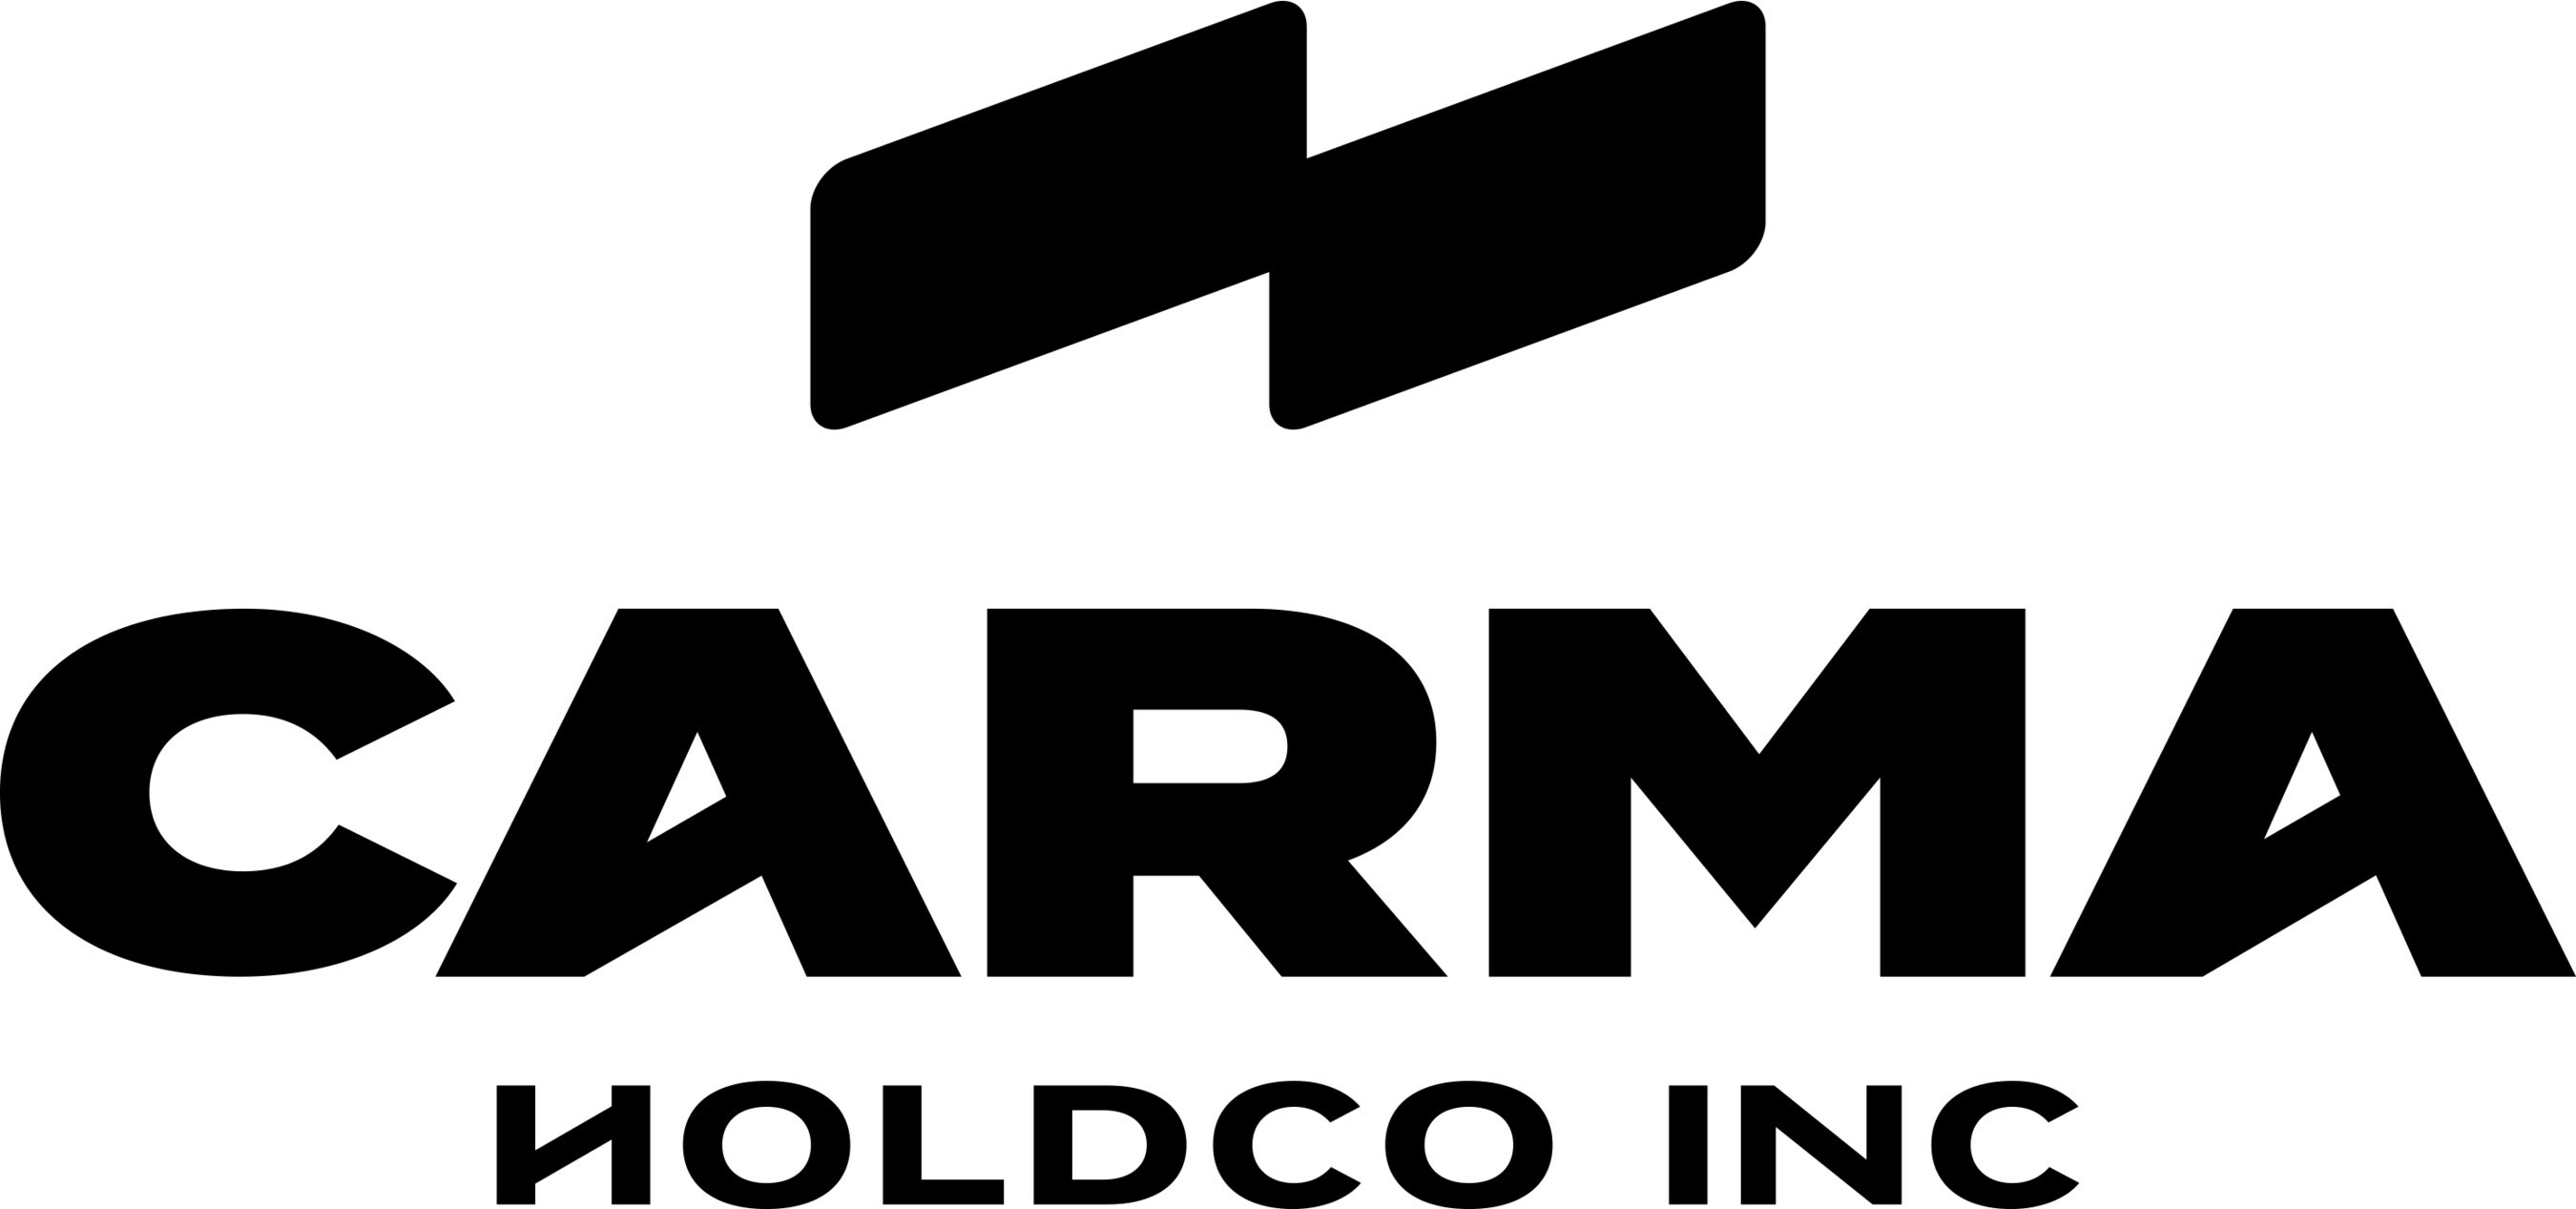 Carma HoldCo Expands Its Reach with Launch of Two New Cannabis Brands ...